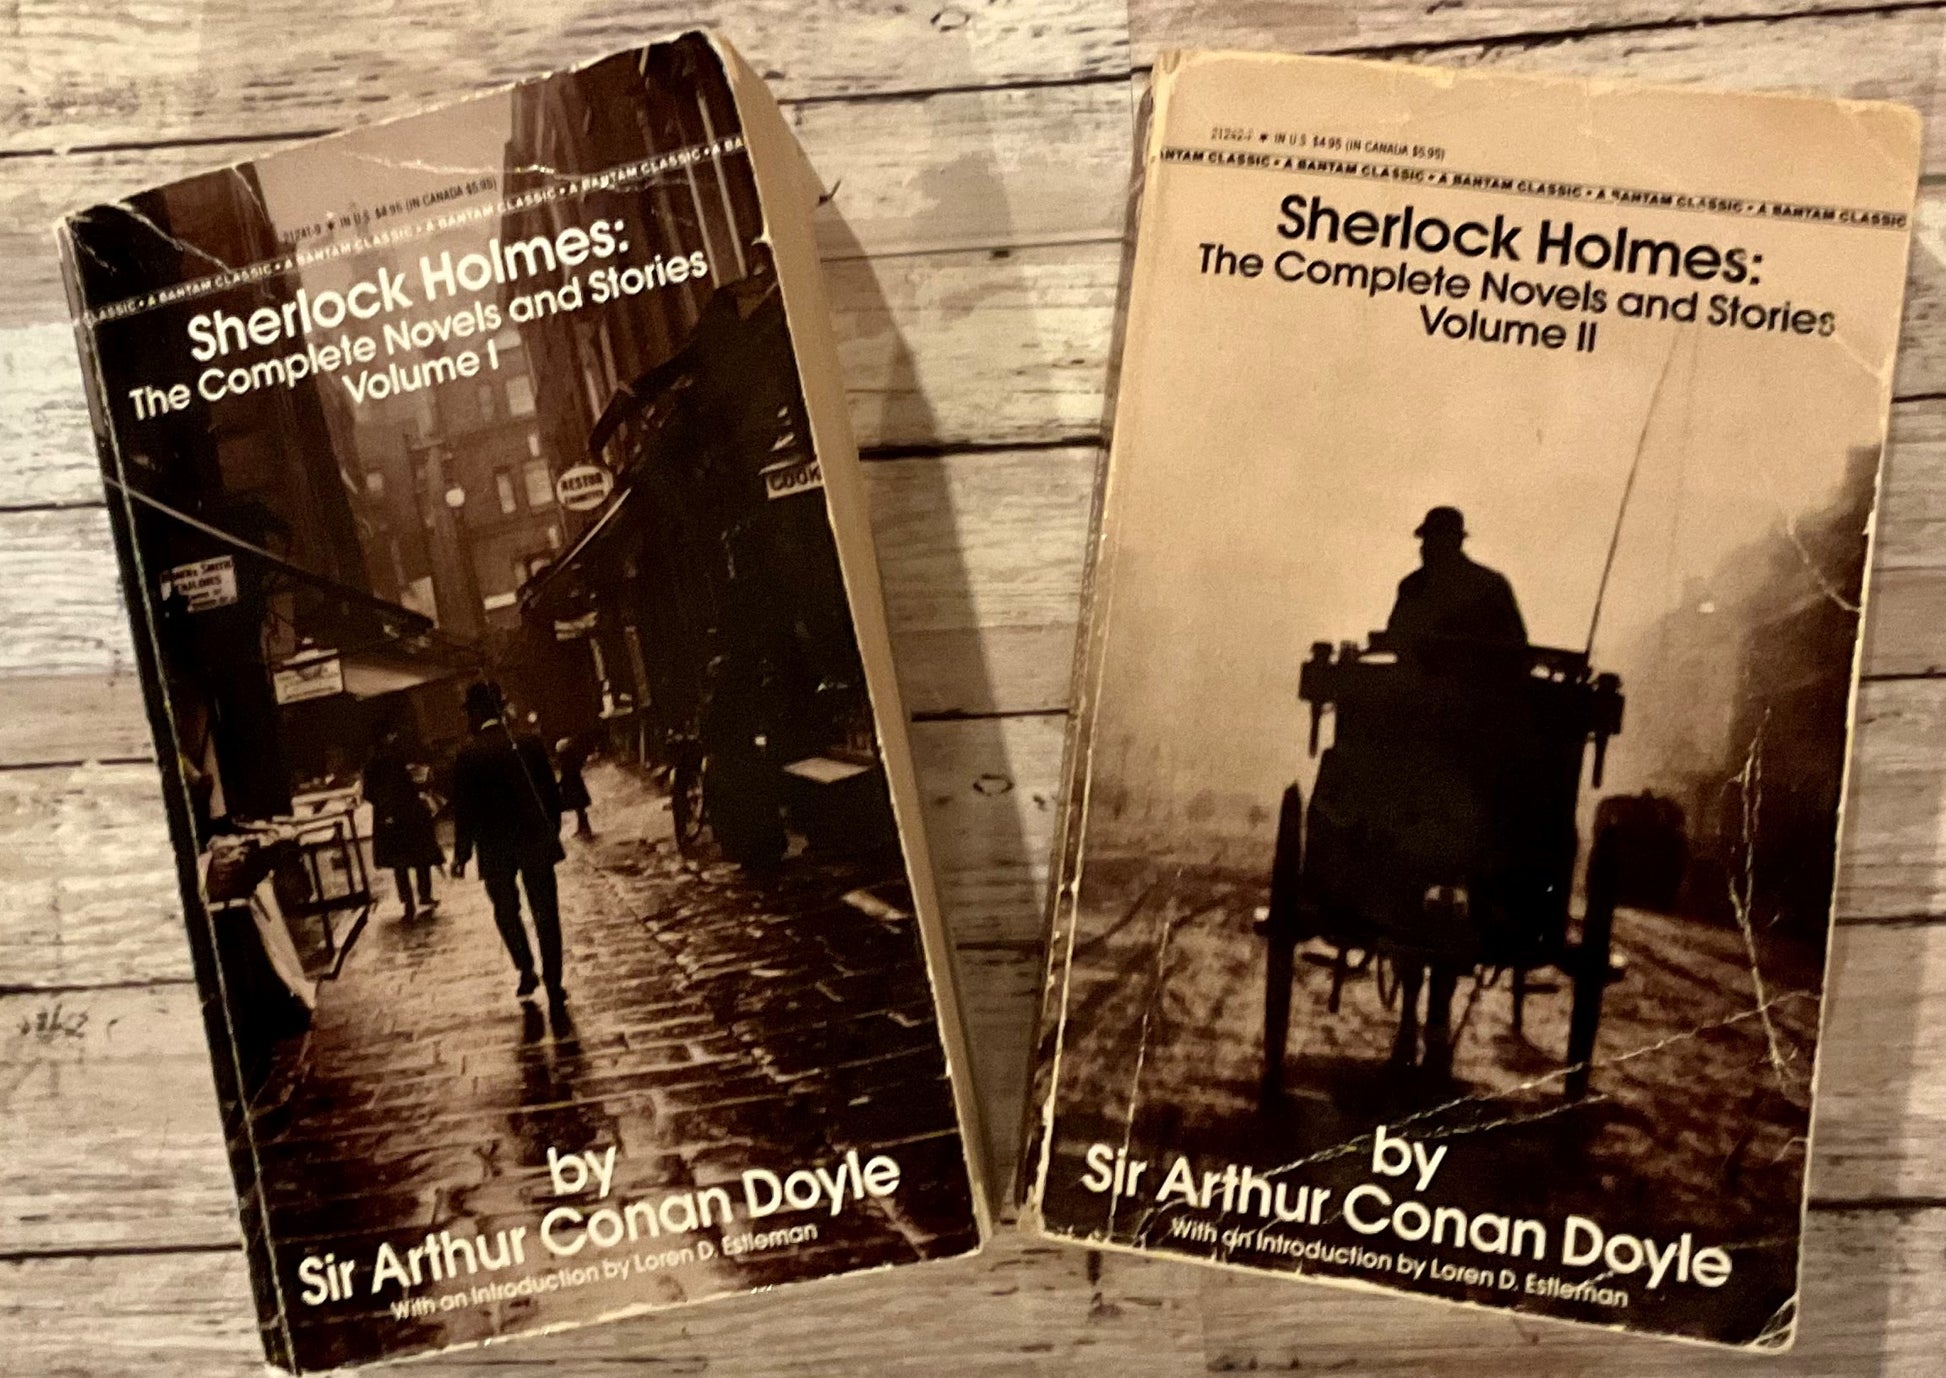 Sherlock Holmes: The Complete Novels and Stories Volume I and II - Anchored Homeschool Resource Center